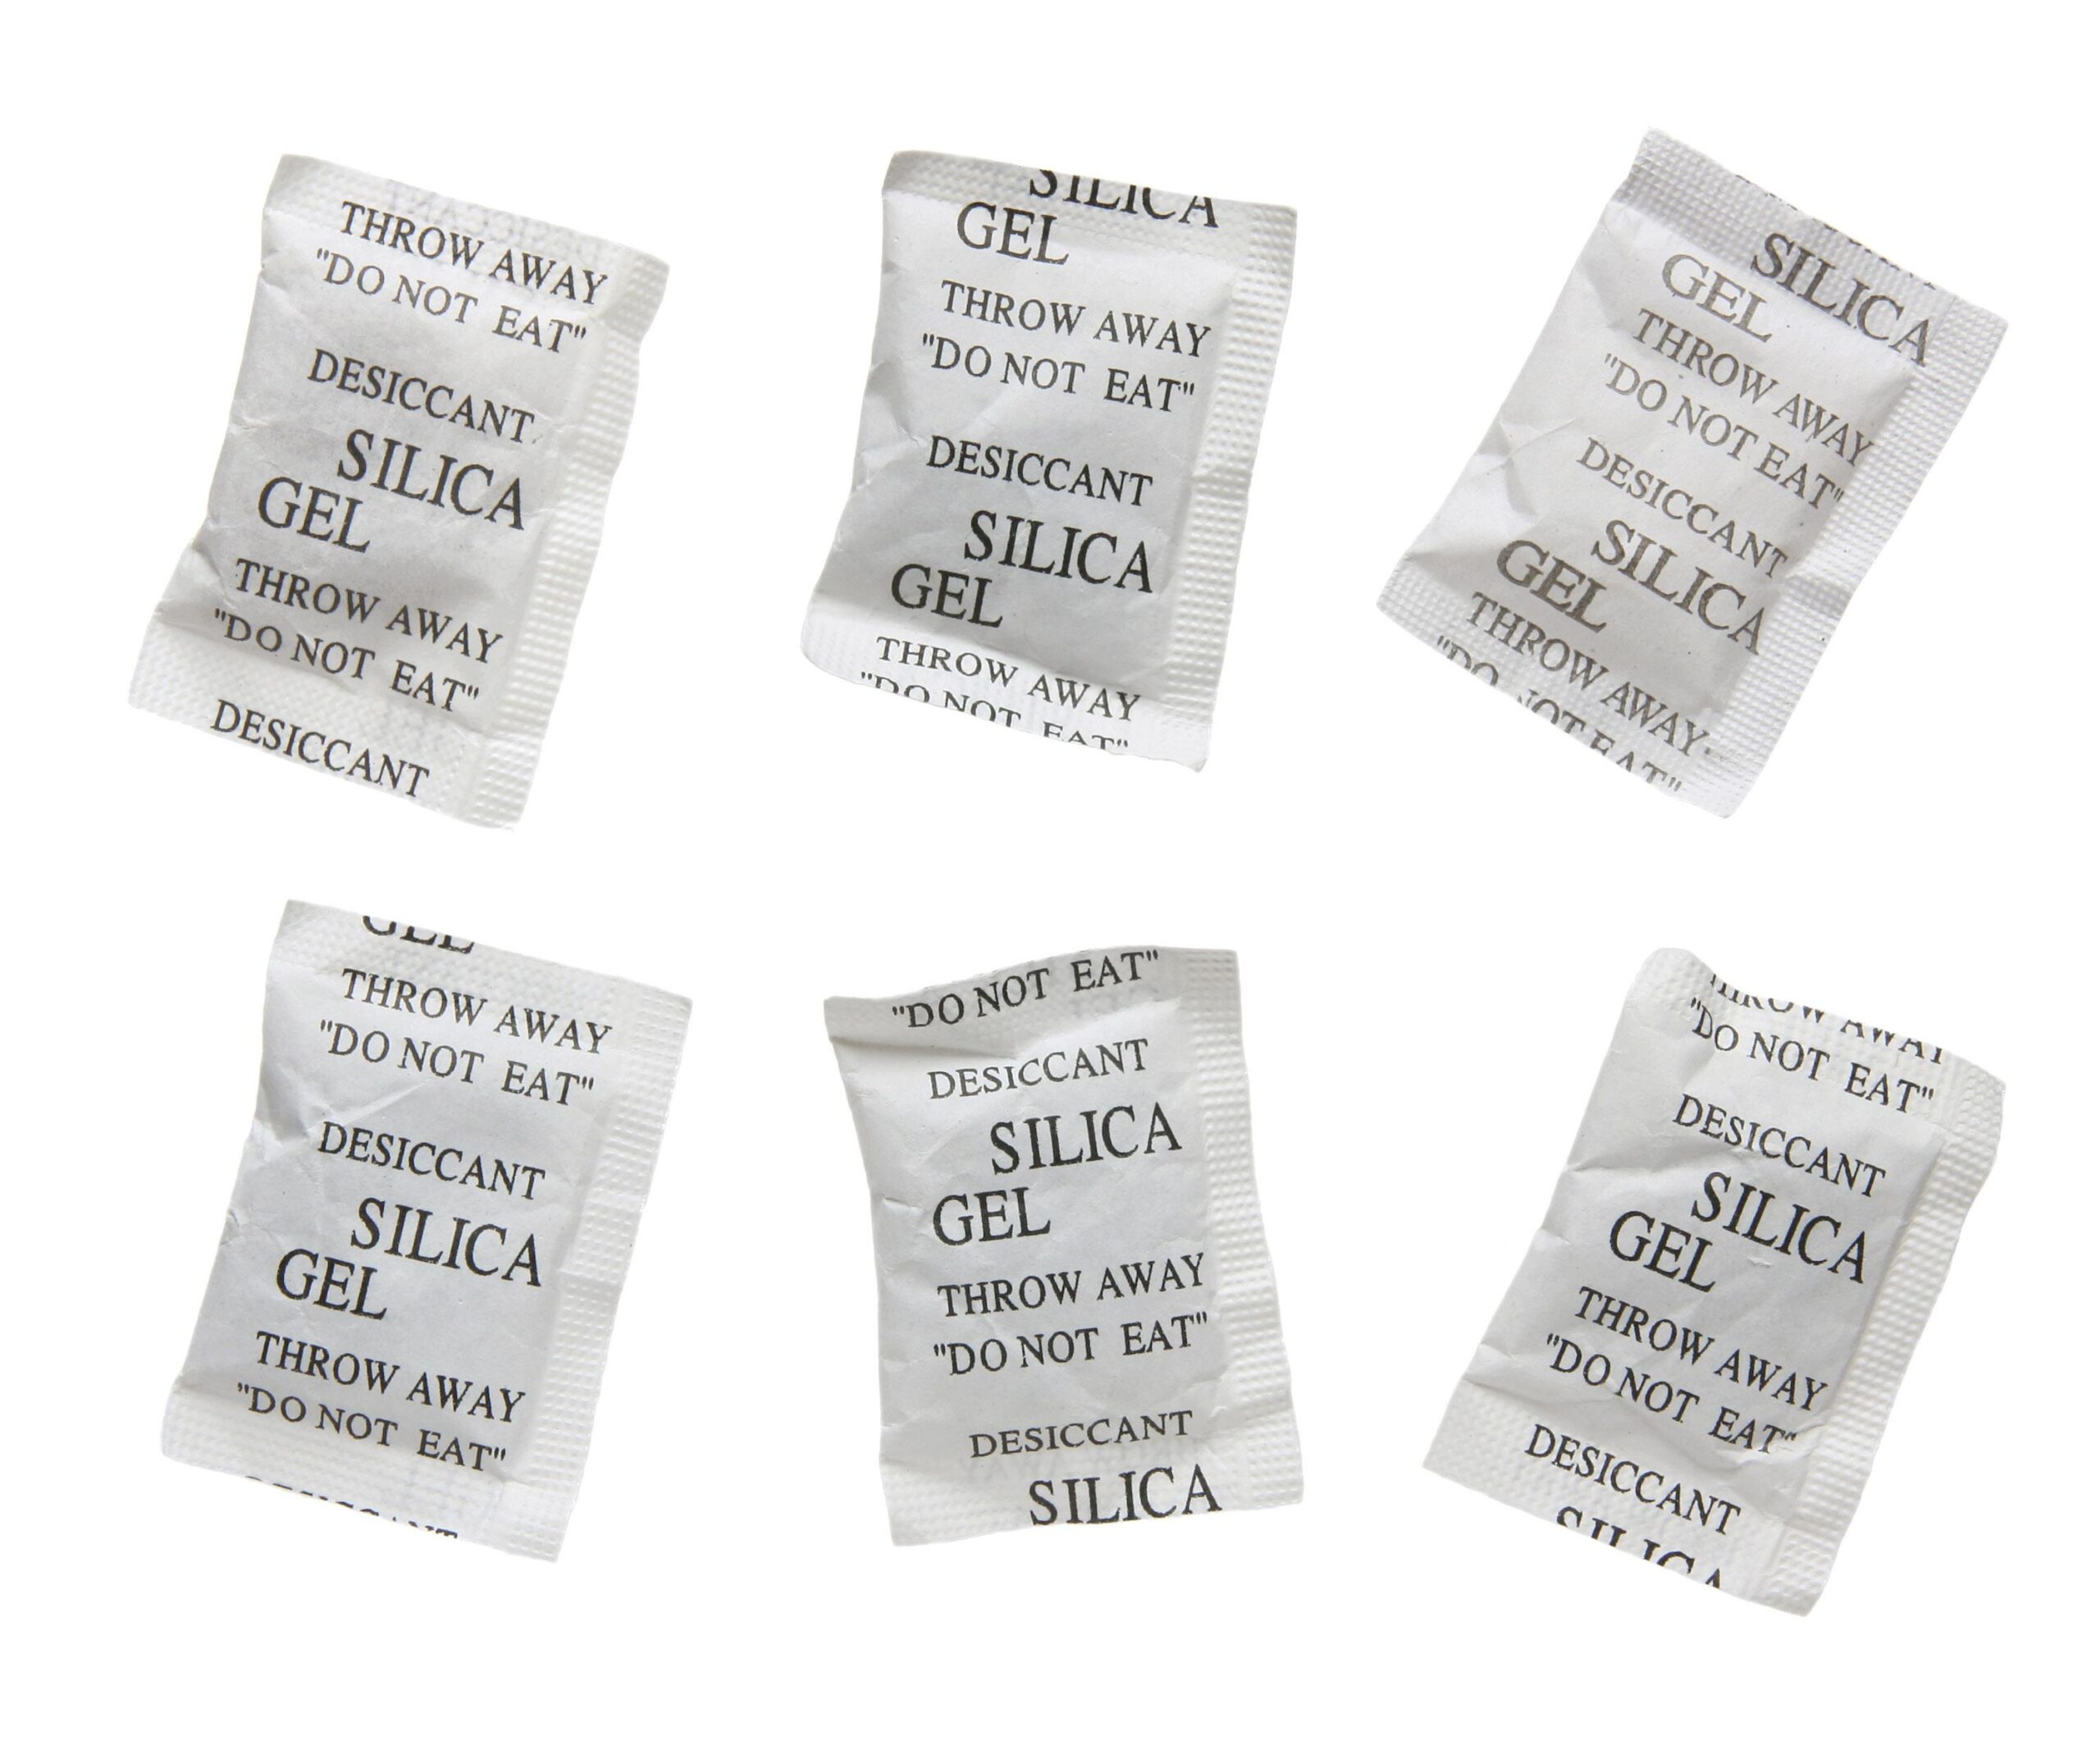 Here’s why you should keep silica gel bags